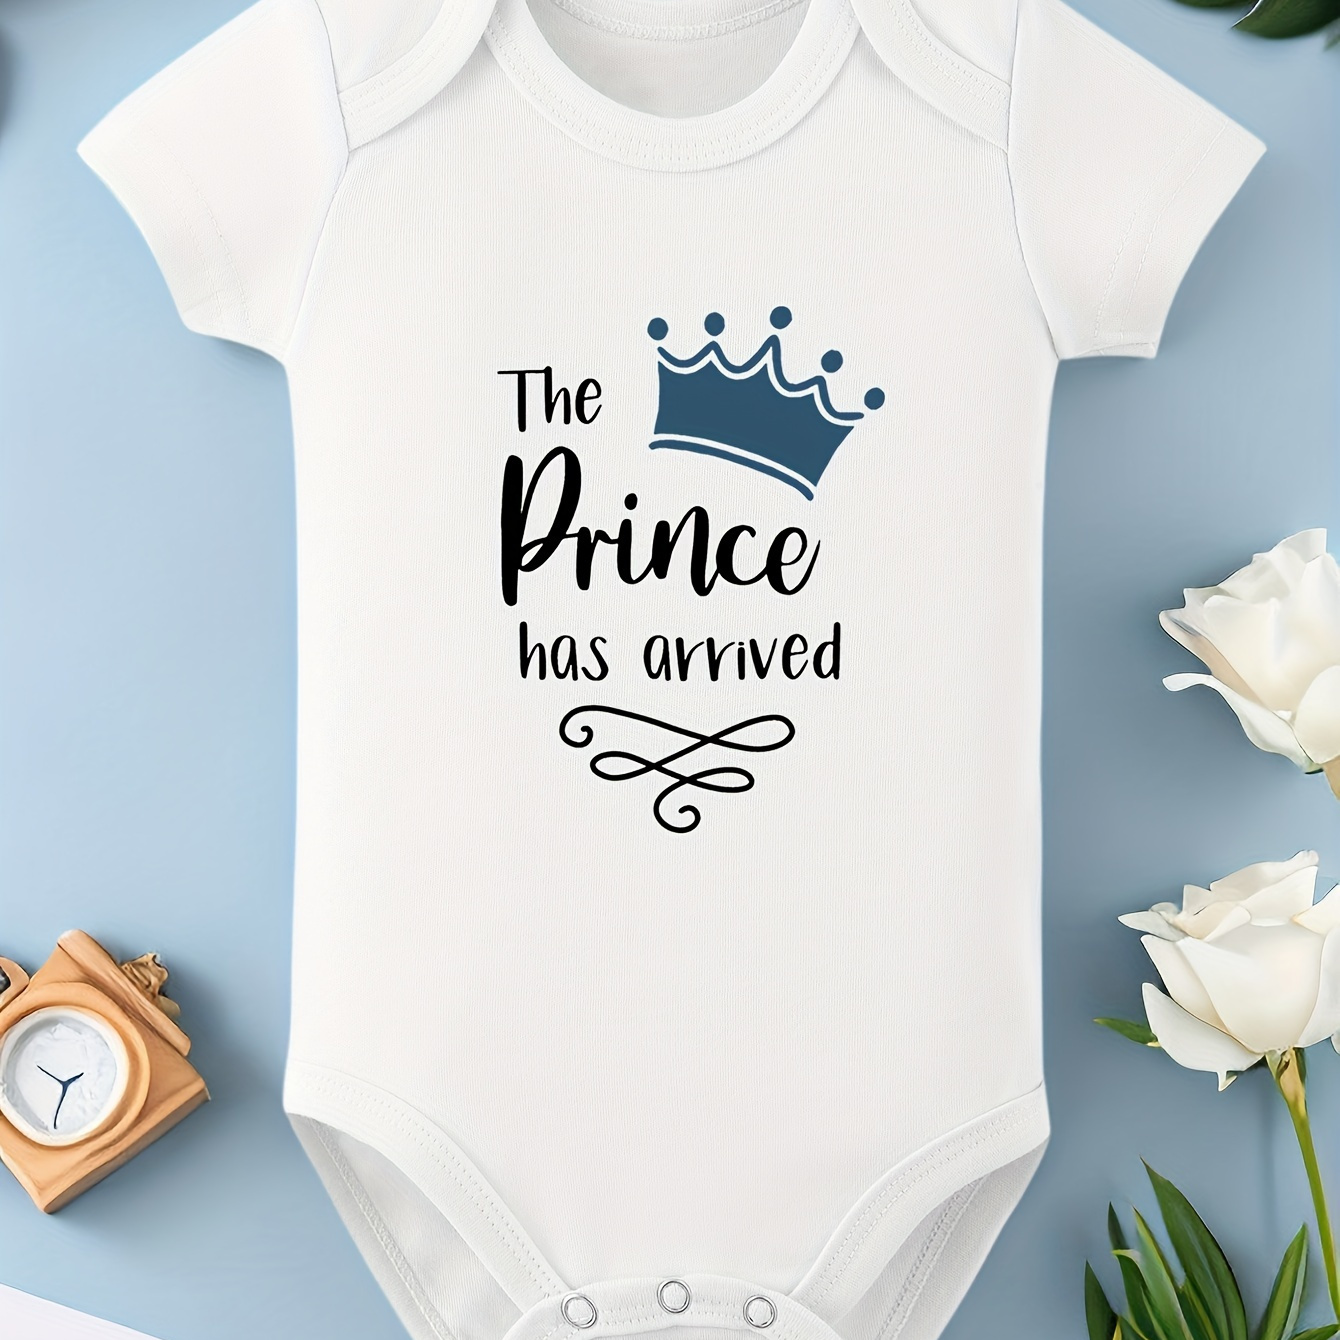 

Baby Boys' Cotton Bodysuit, "the Prince Has Arrived" Letter Print, Cotton Short Sleeve Onesie, Newborn Party Fashion, Comfortable Infant Clothing, Ideal Gift For Baby Shower